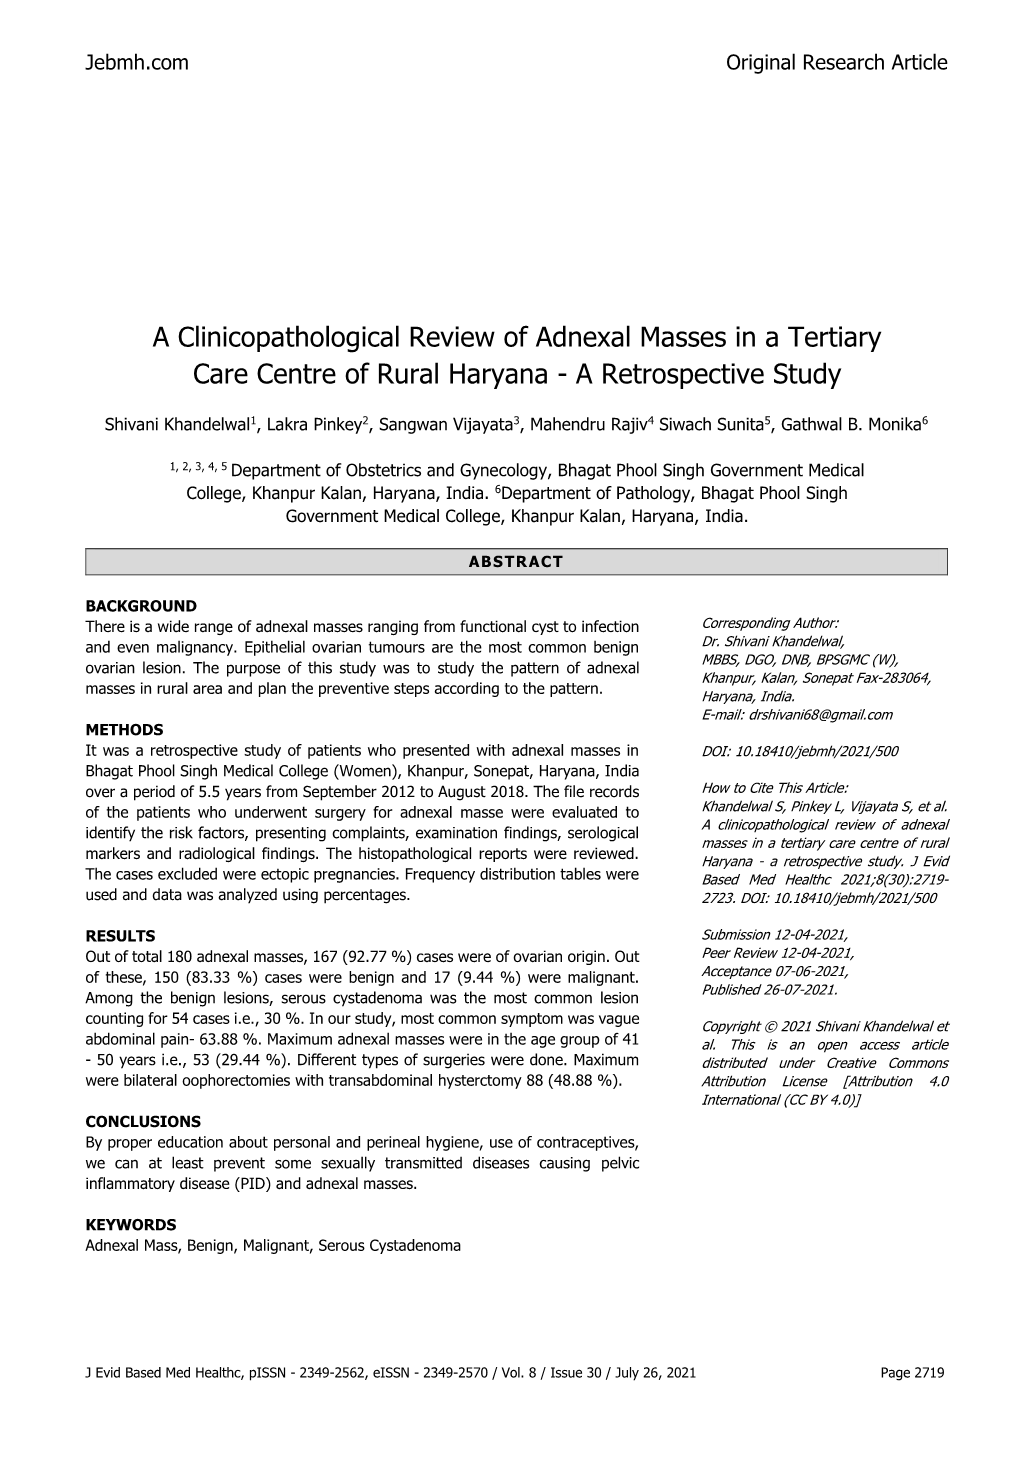 A Clinicopathological Review of Adnexal Masses in a Tertiary Care Centre of Rural Haryana - a Retrospective Study